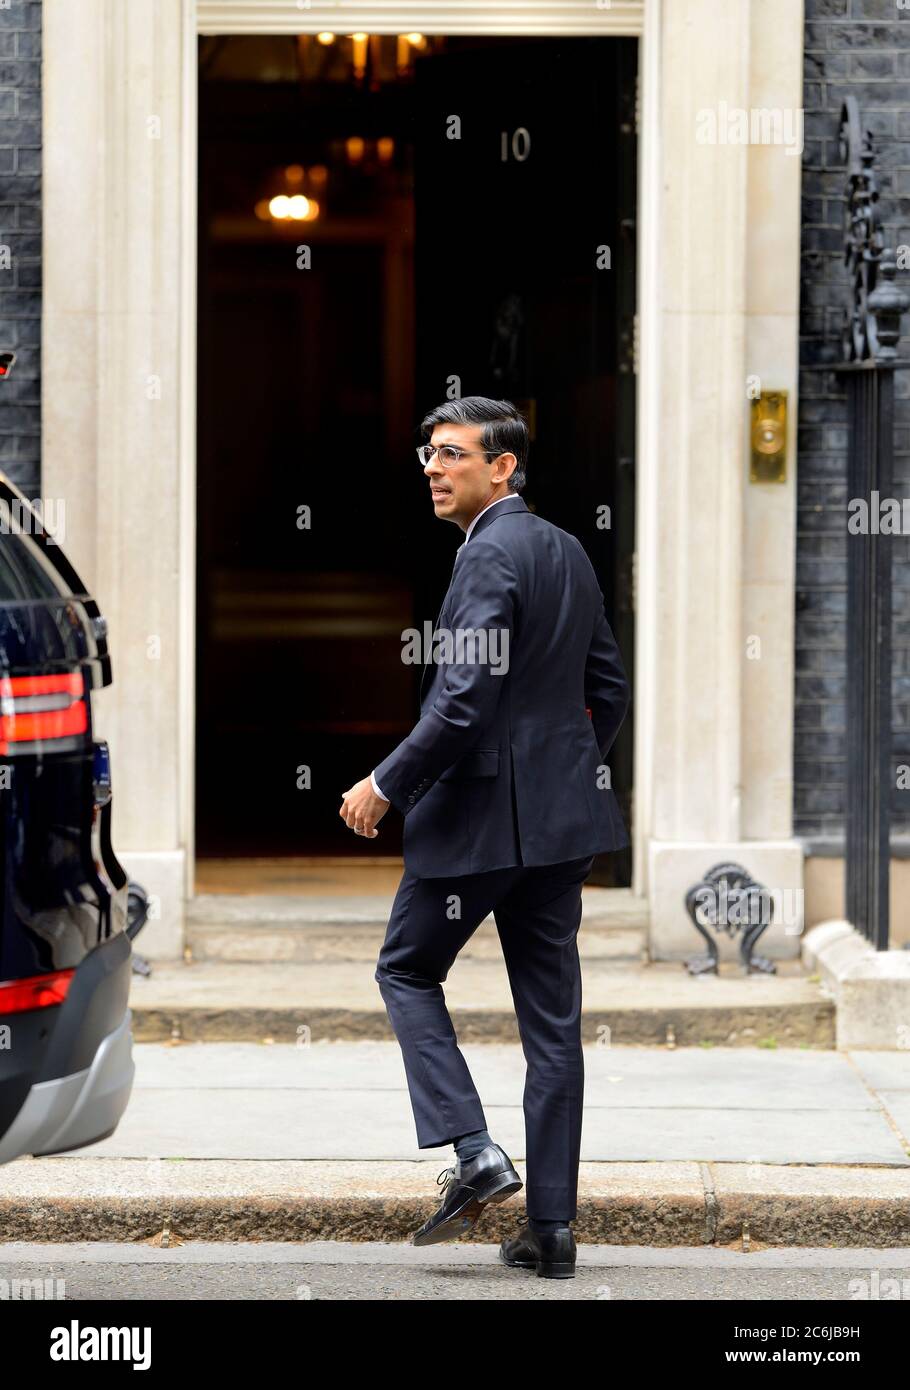 Rishi Sunak MP - Chancellor of the Exchequer - arriving in Downing Street after answering Treasury Questions in Parliament, 7th July 2020 Stock Photo